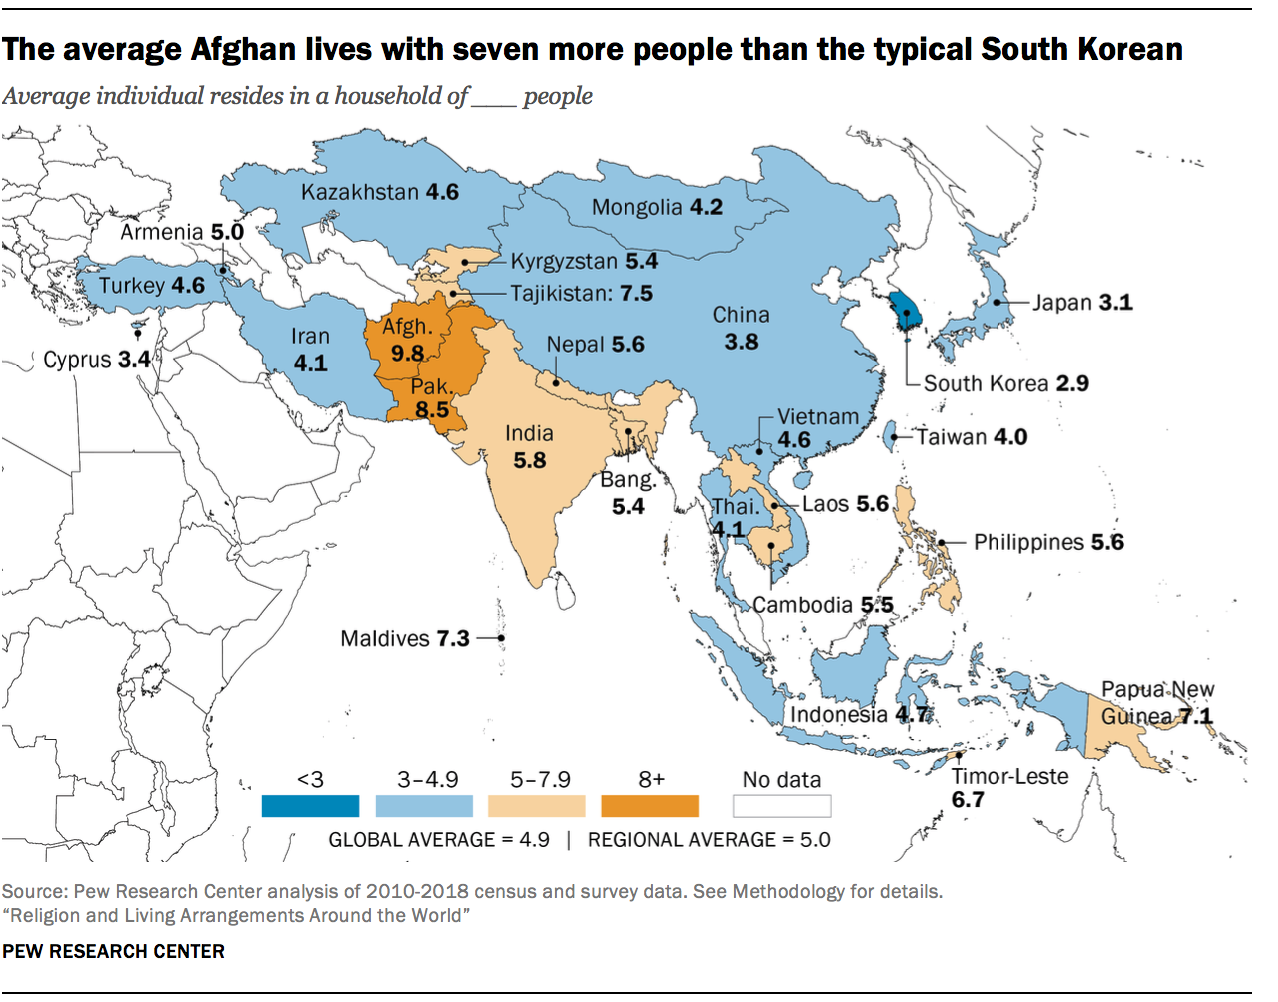 The average Afghan lives with seven more people than the typical South Korean